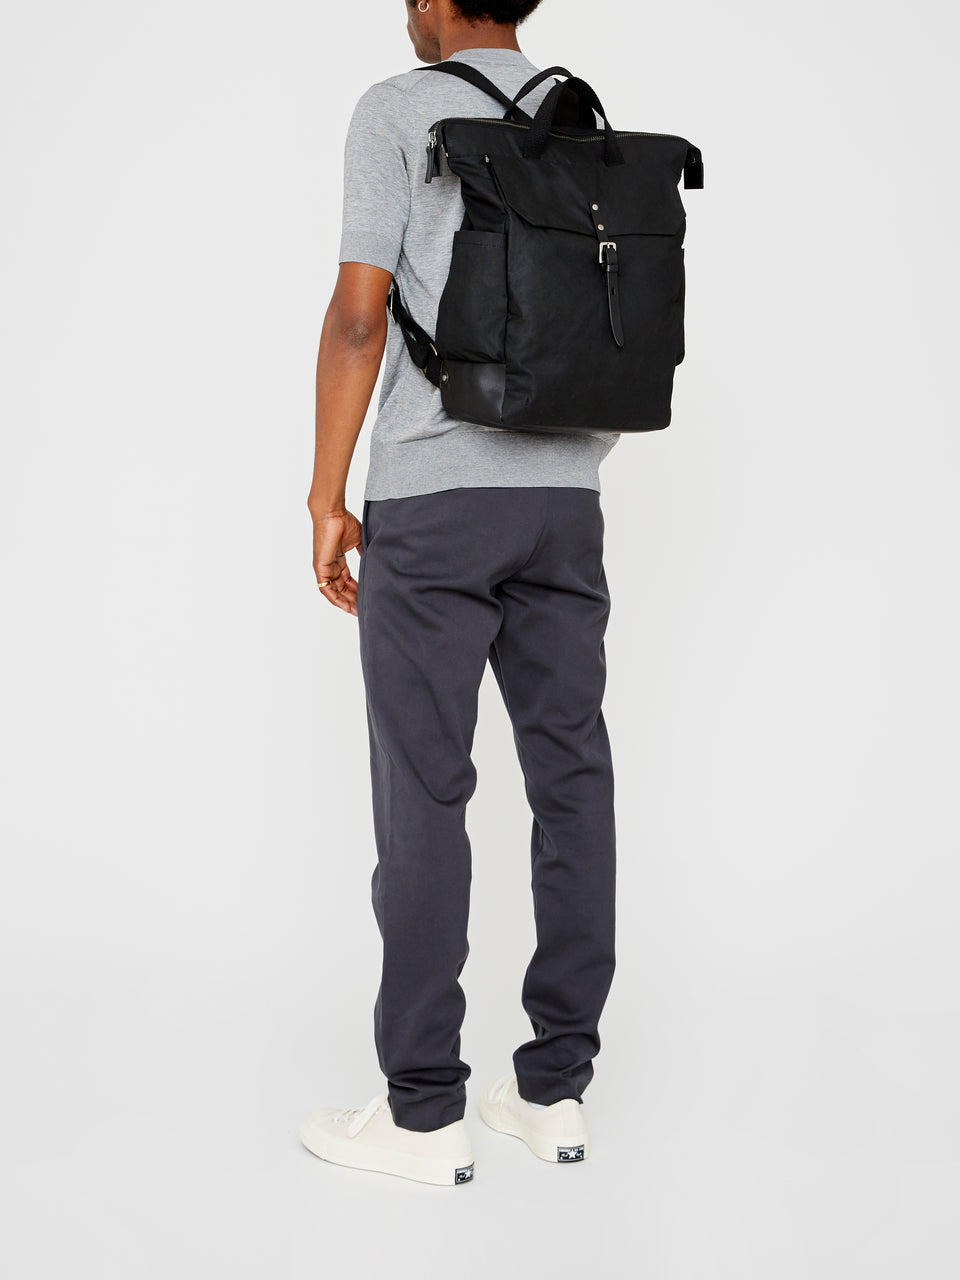 Fin Waxed Cotton Backpack in Black